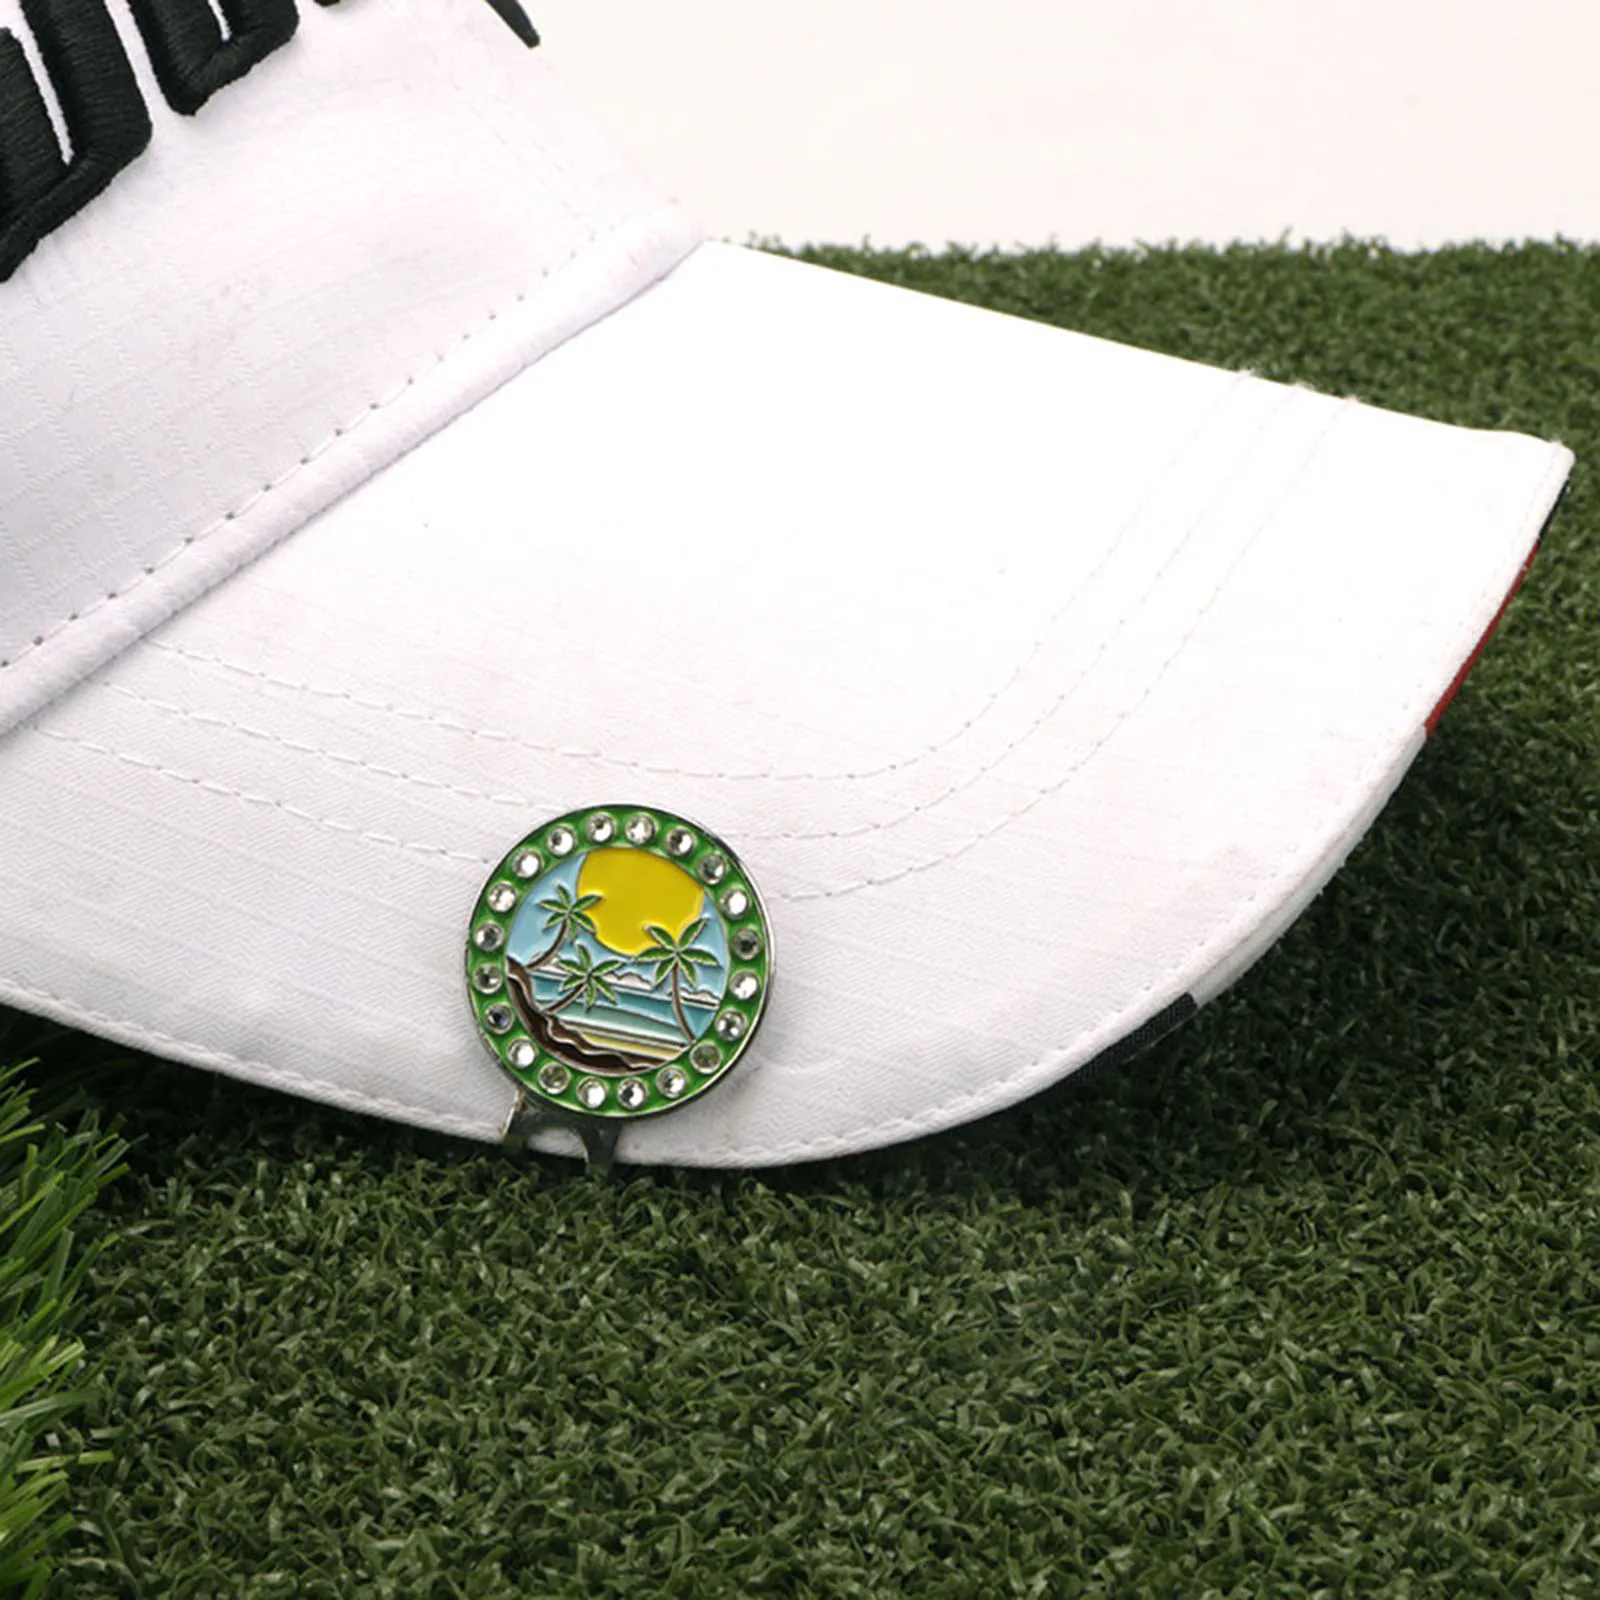 Zinc Alloy 25mm Removable Golf Ball Markers One Putt Training Aids Hat Clip